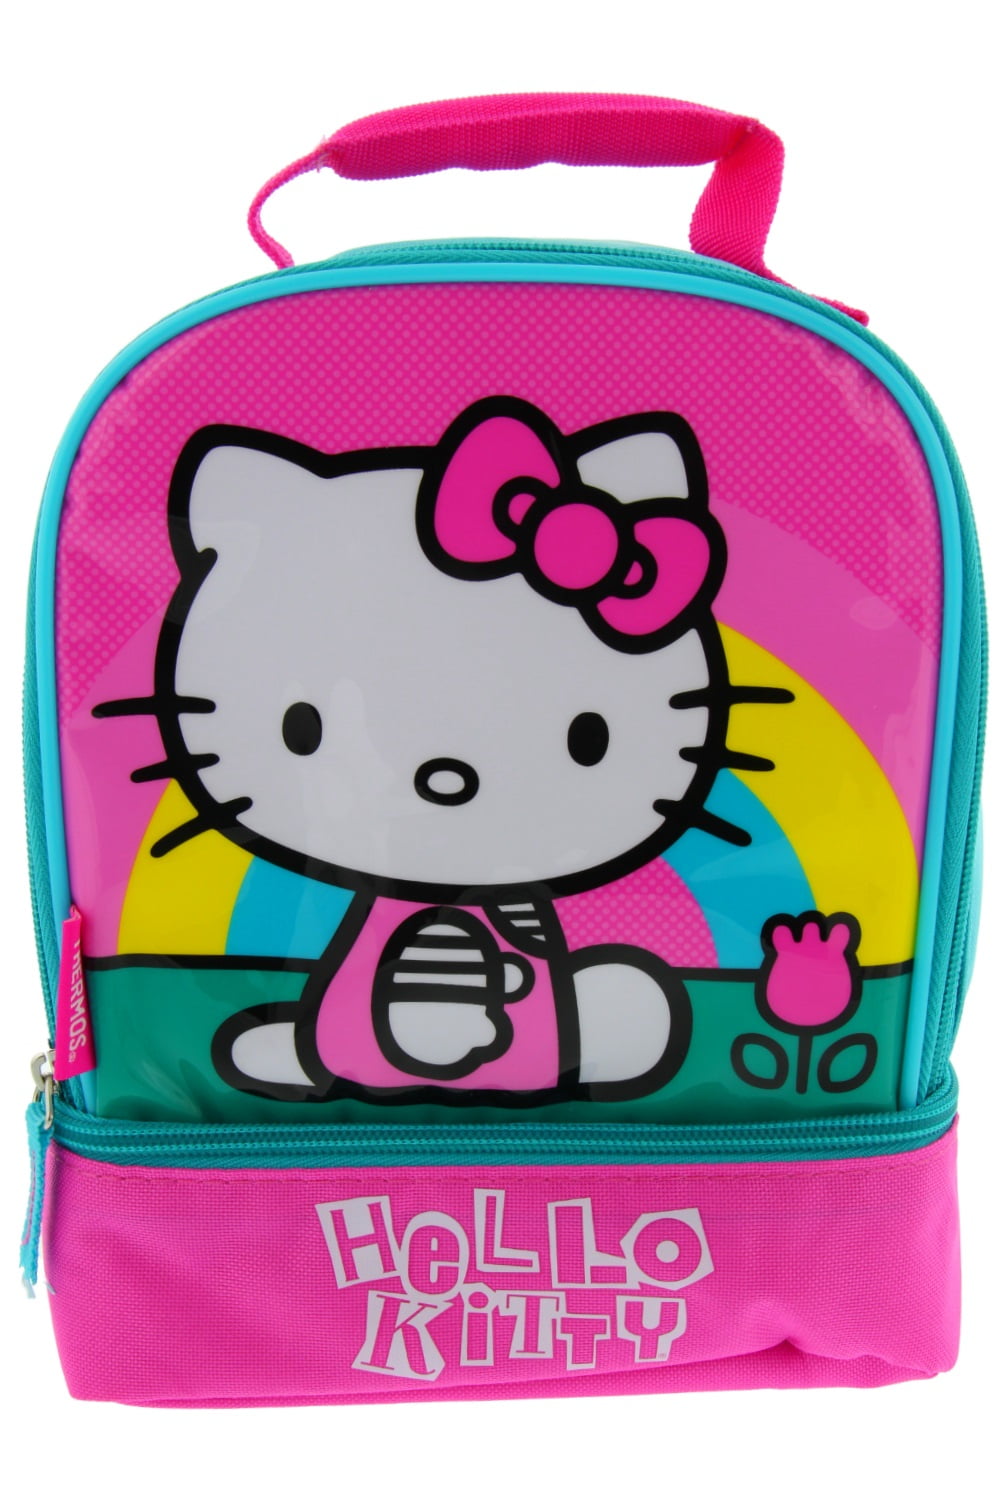 Details about   HELLO KITTY LUNCH BOX Pink Black Face HARD PLASTIC Travel Storage SCHOOL GIFT 